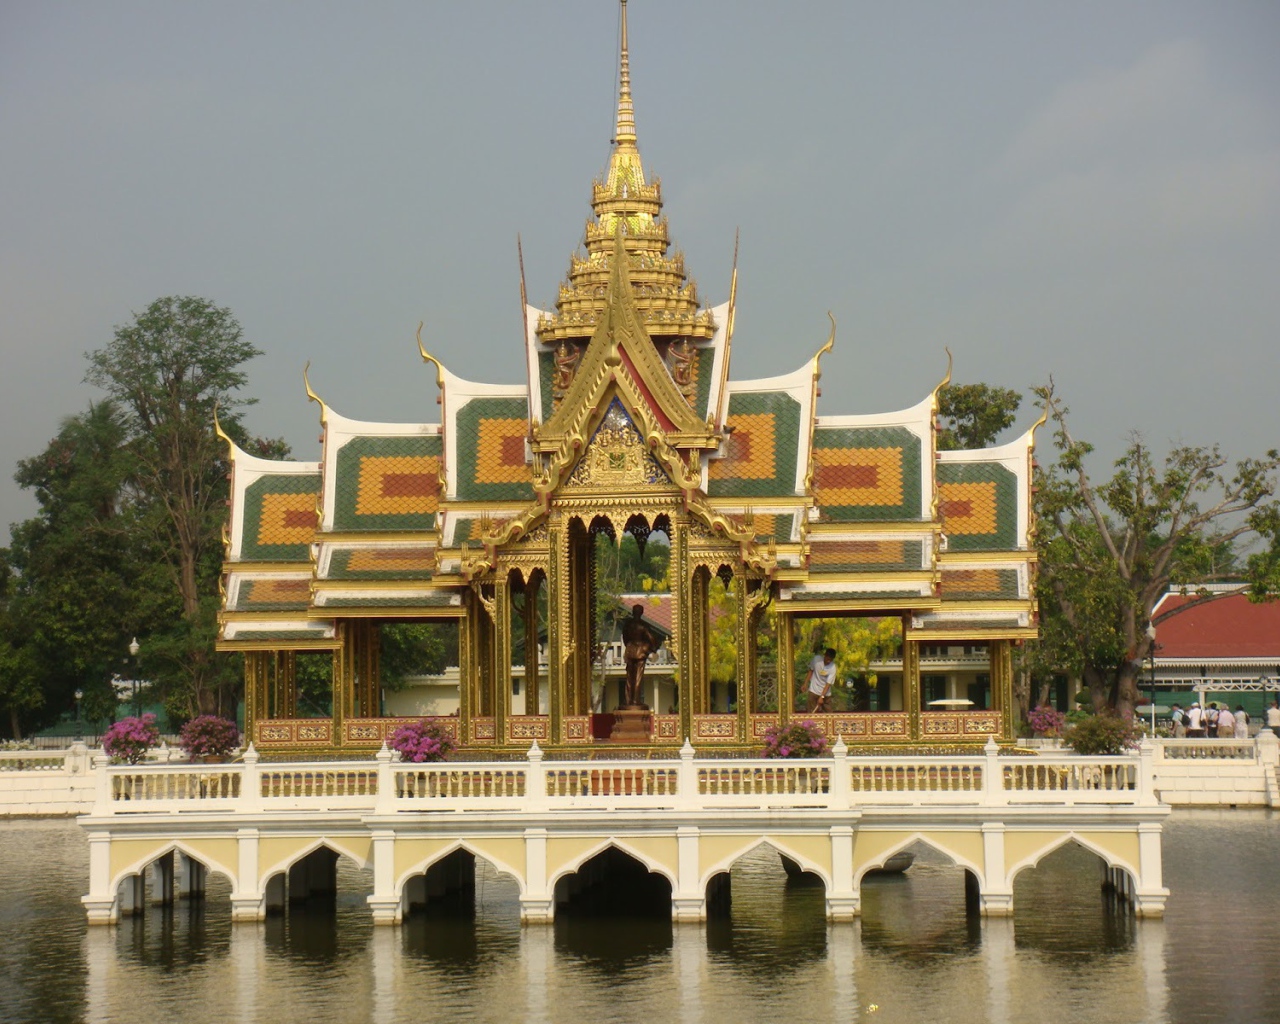 Temple on the water at the resort Ayuthaya, Thailand